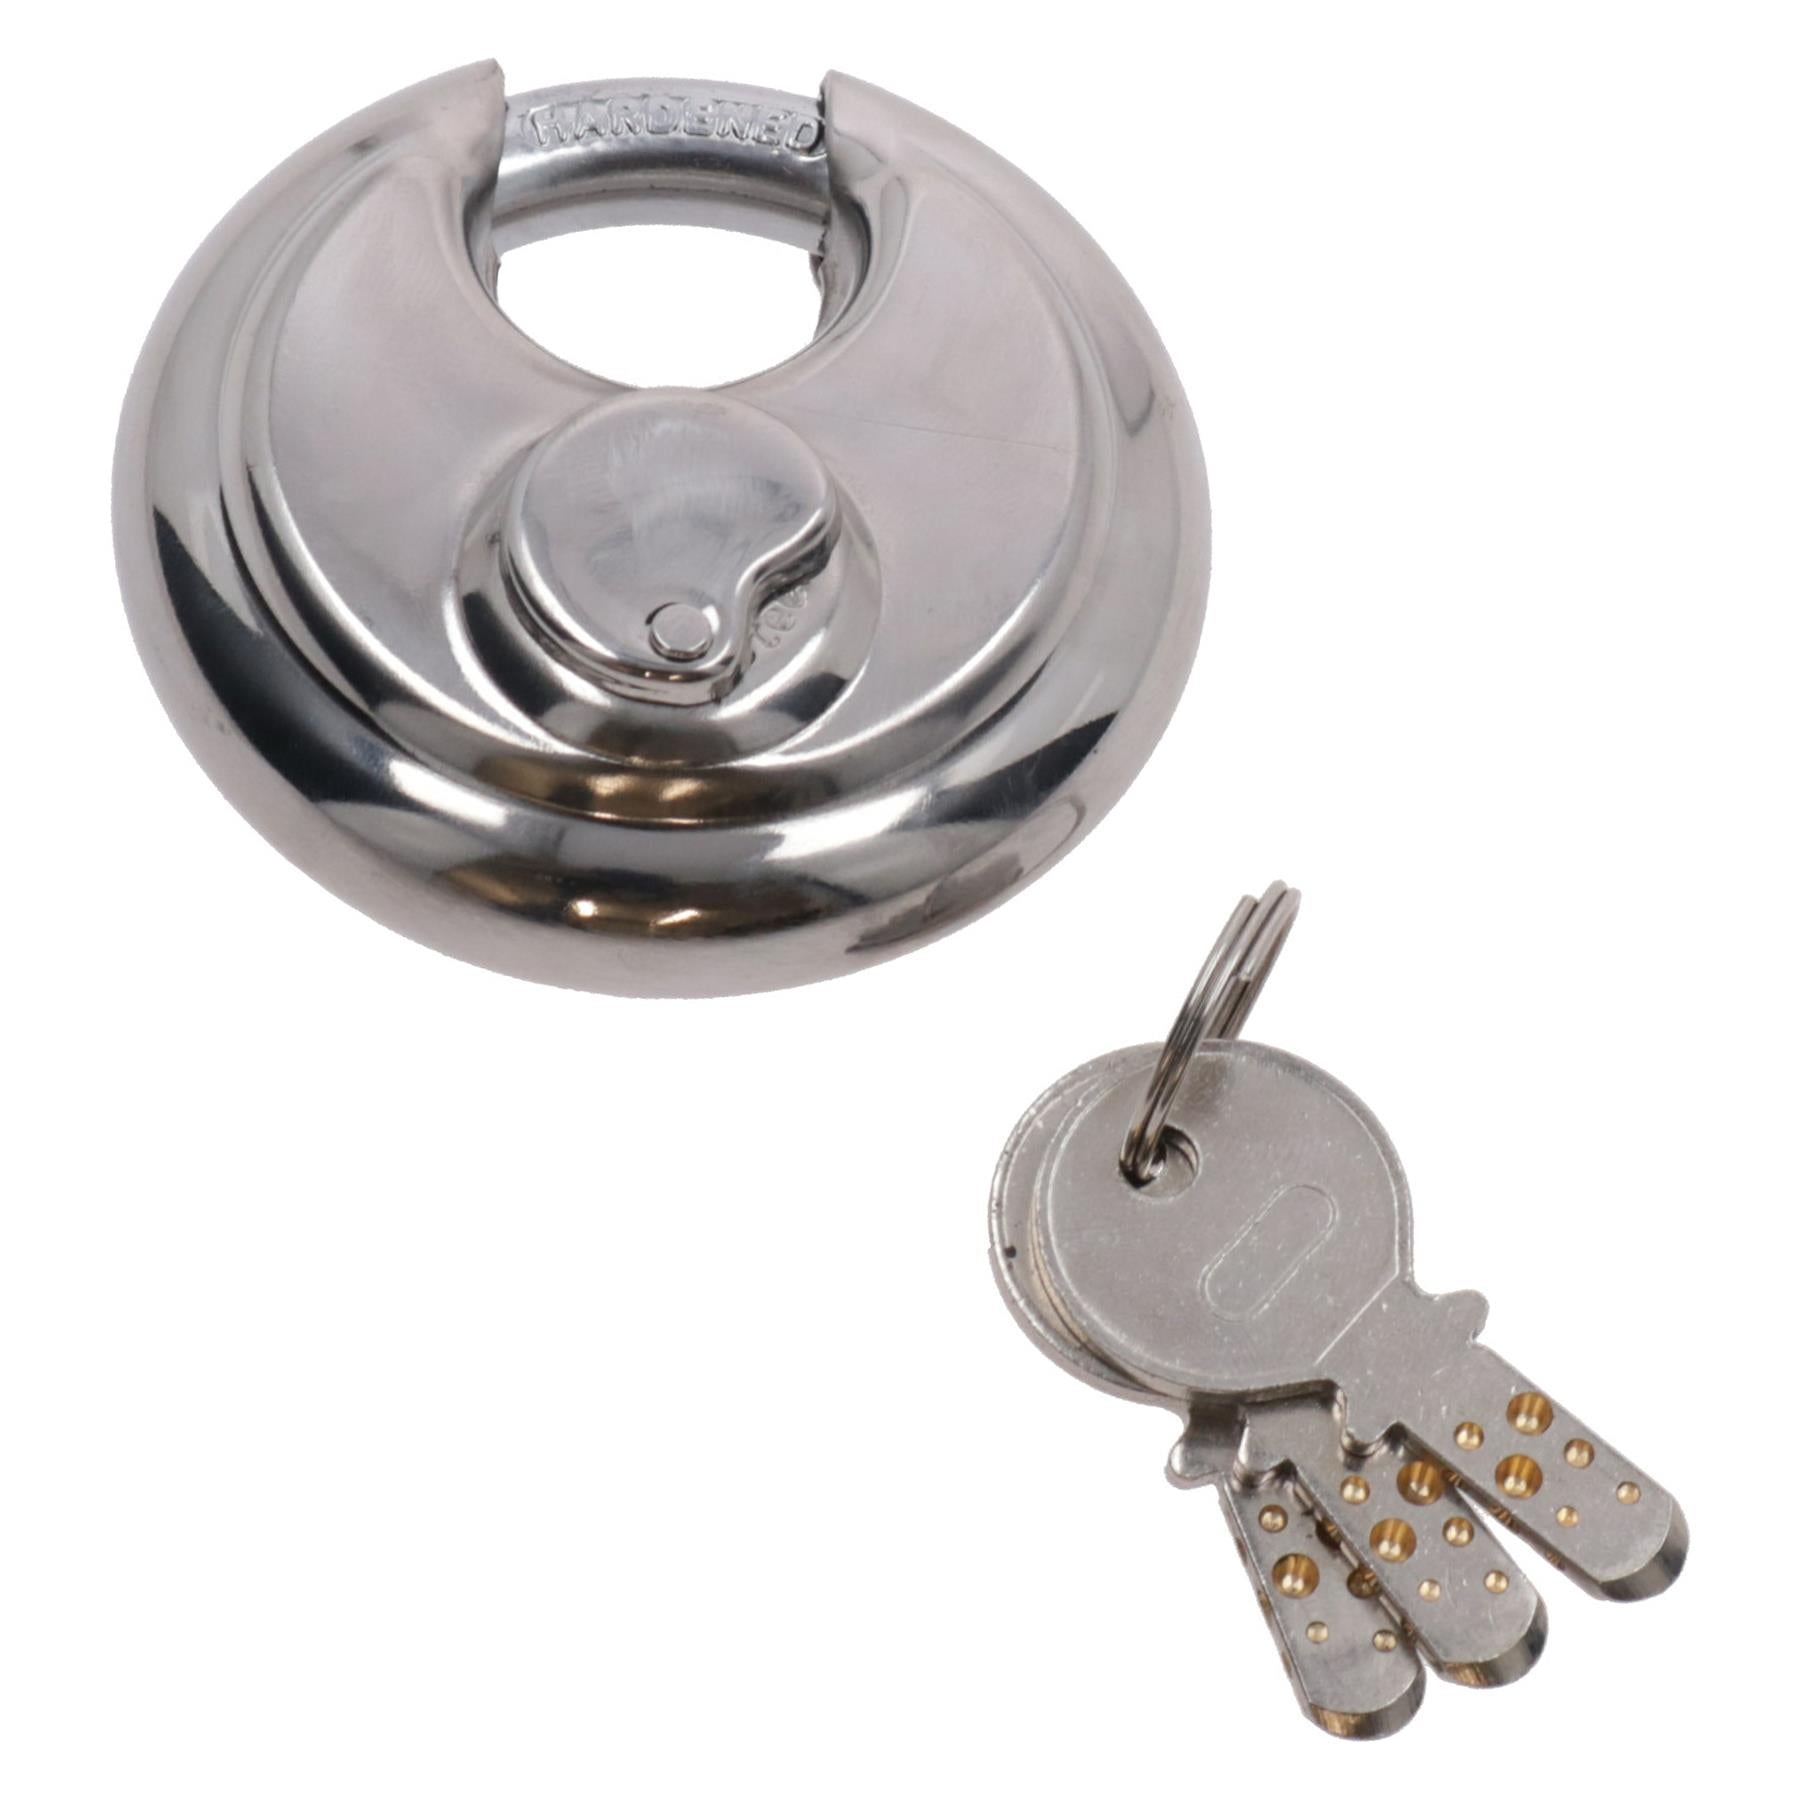 Removable Tow Ball Security Post Lock for Caravans Trailers Driveway Cement In